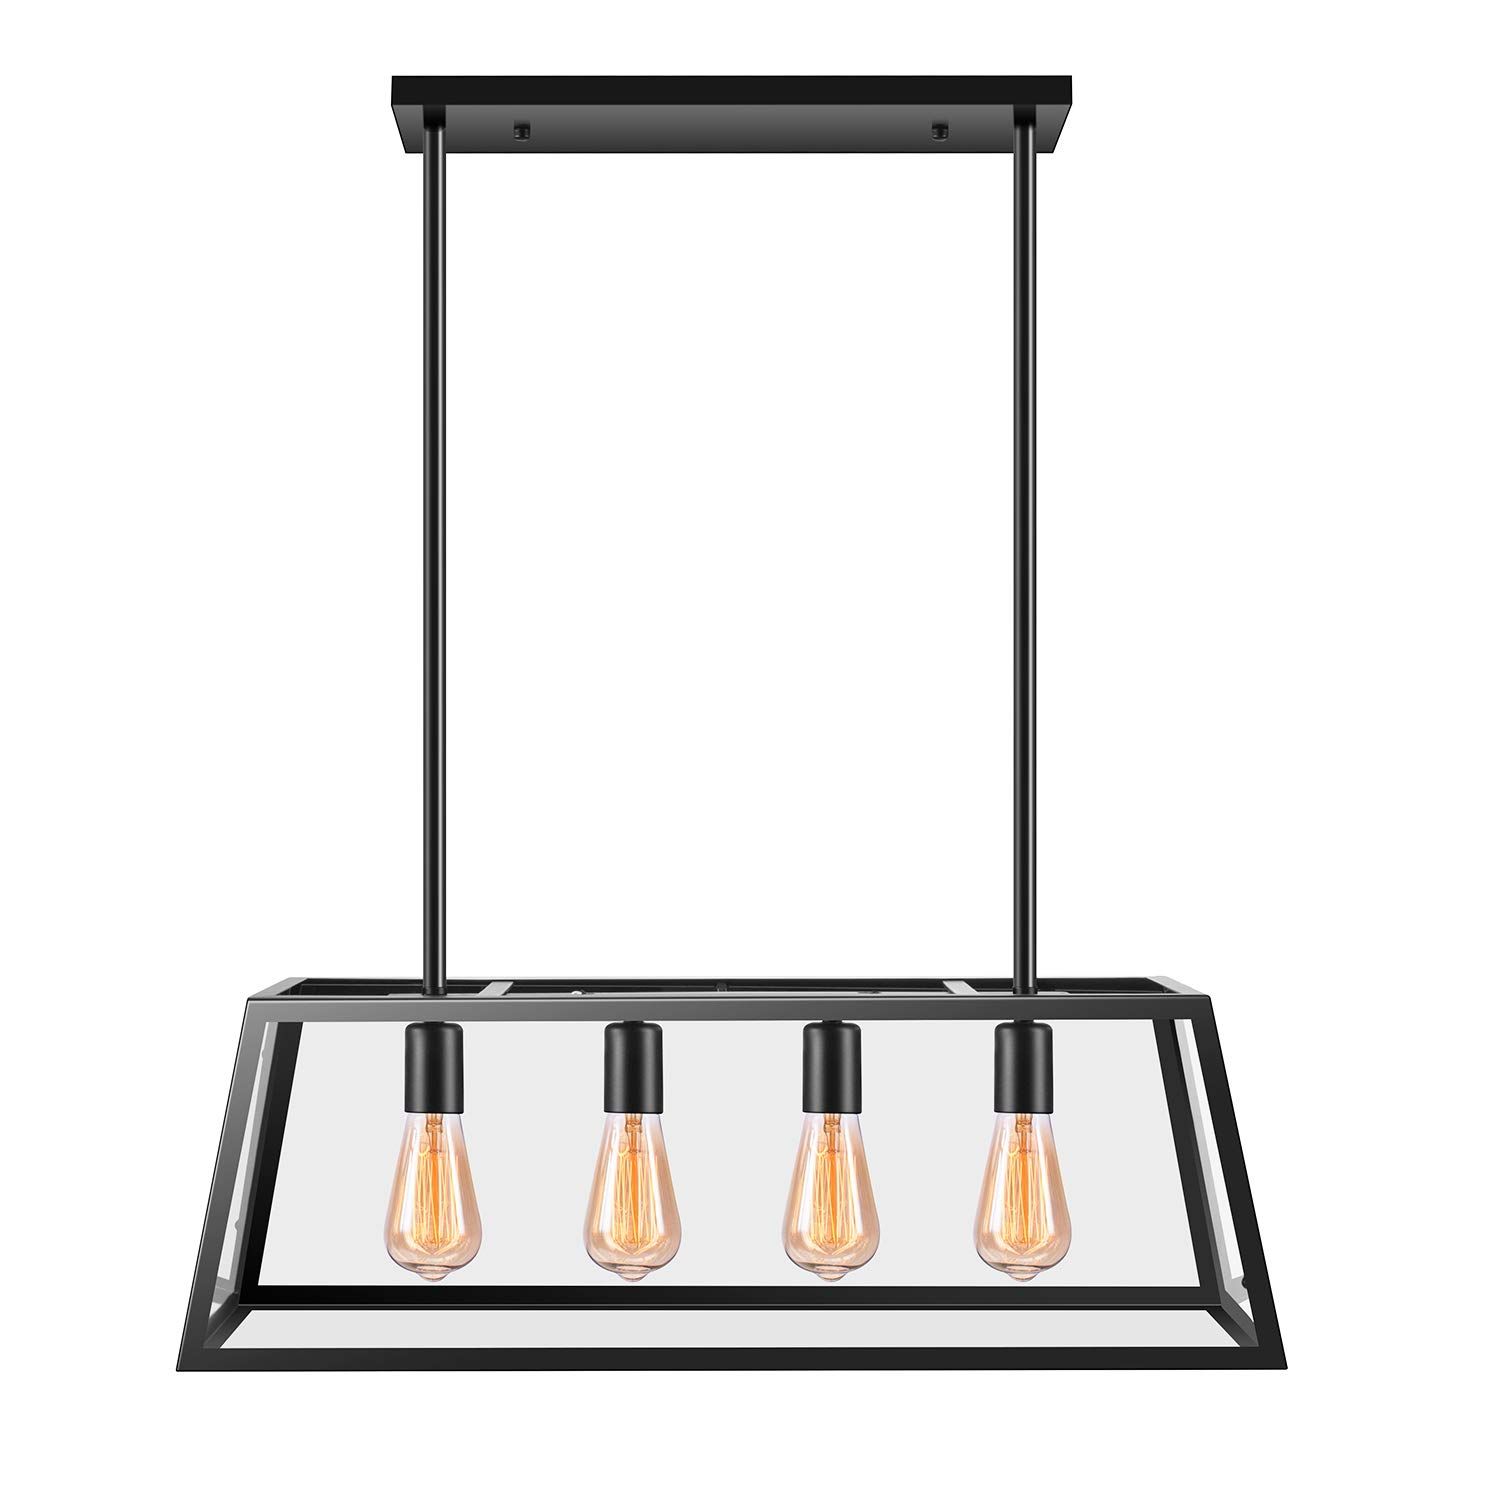 Kitchen Island Pendant Lighting with 4 Lamp Sockets, Pynsseu Matte Black Shade with Clear Glass Pane | Amazon (US)